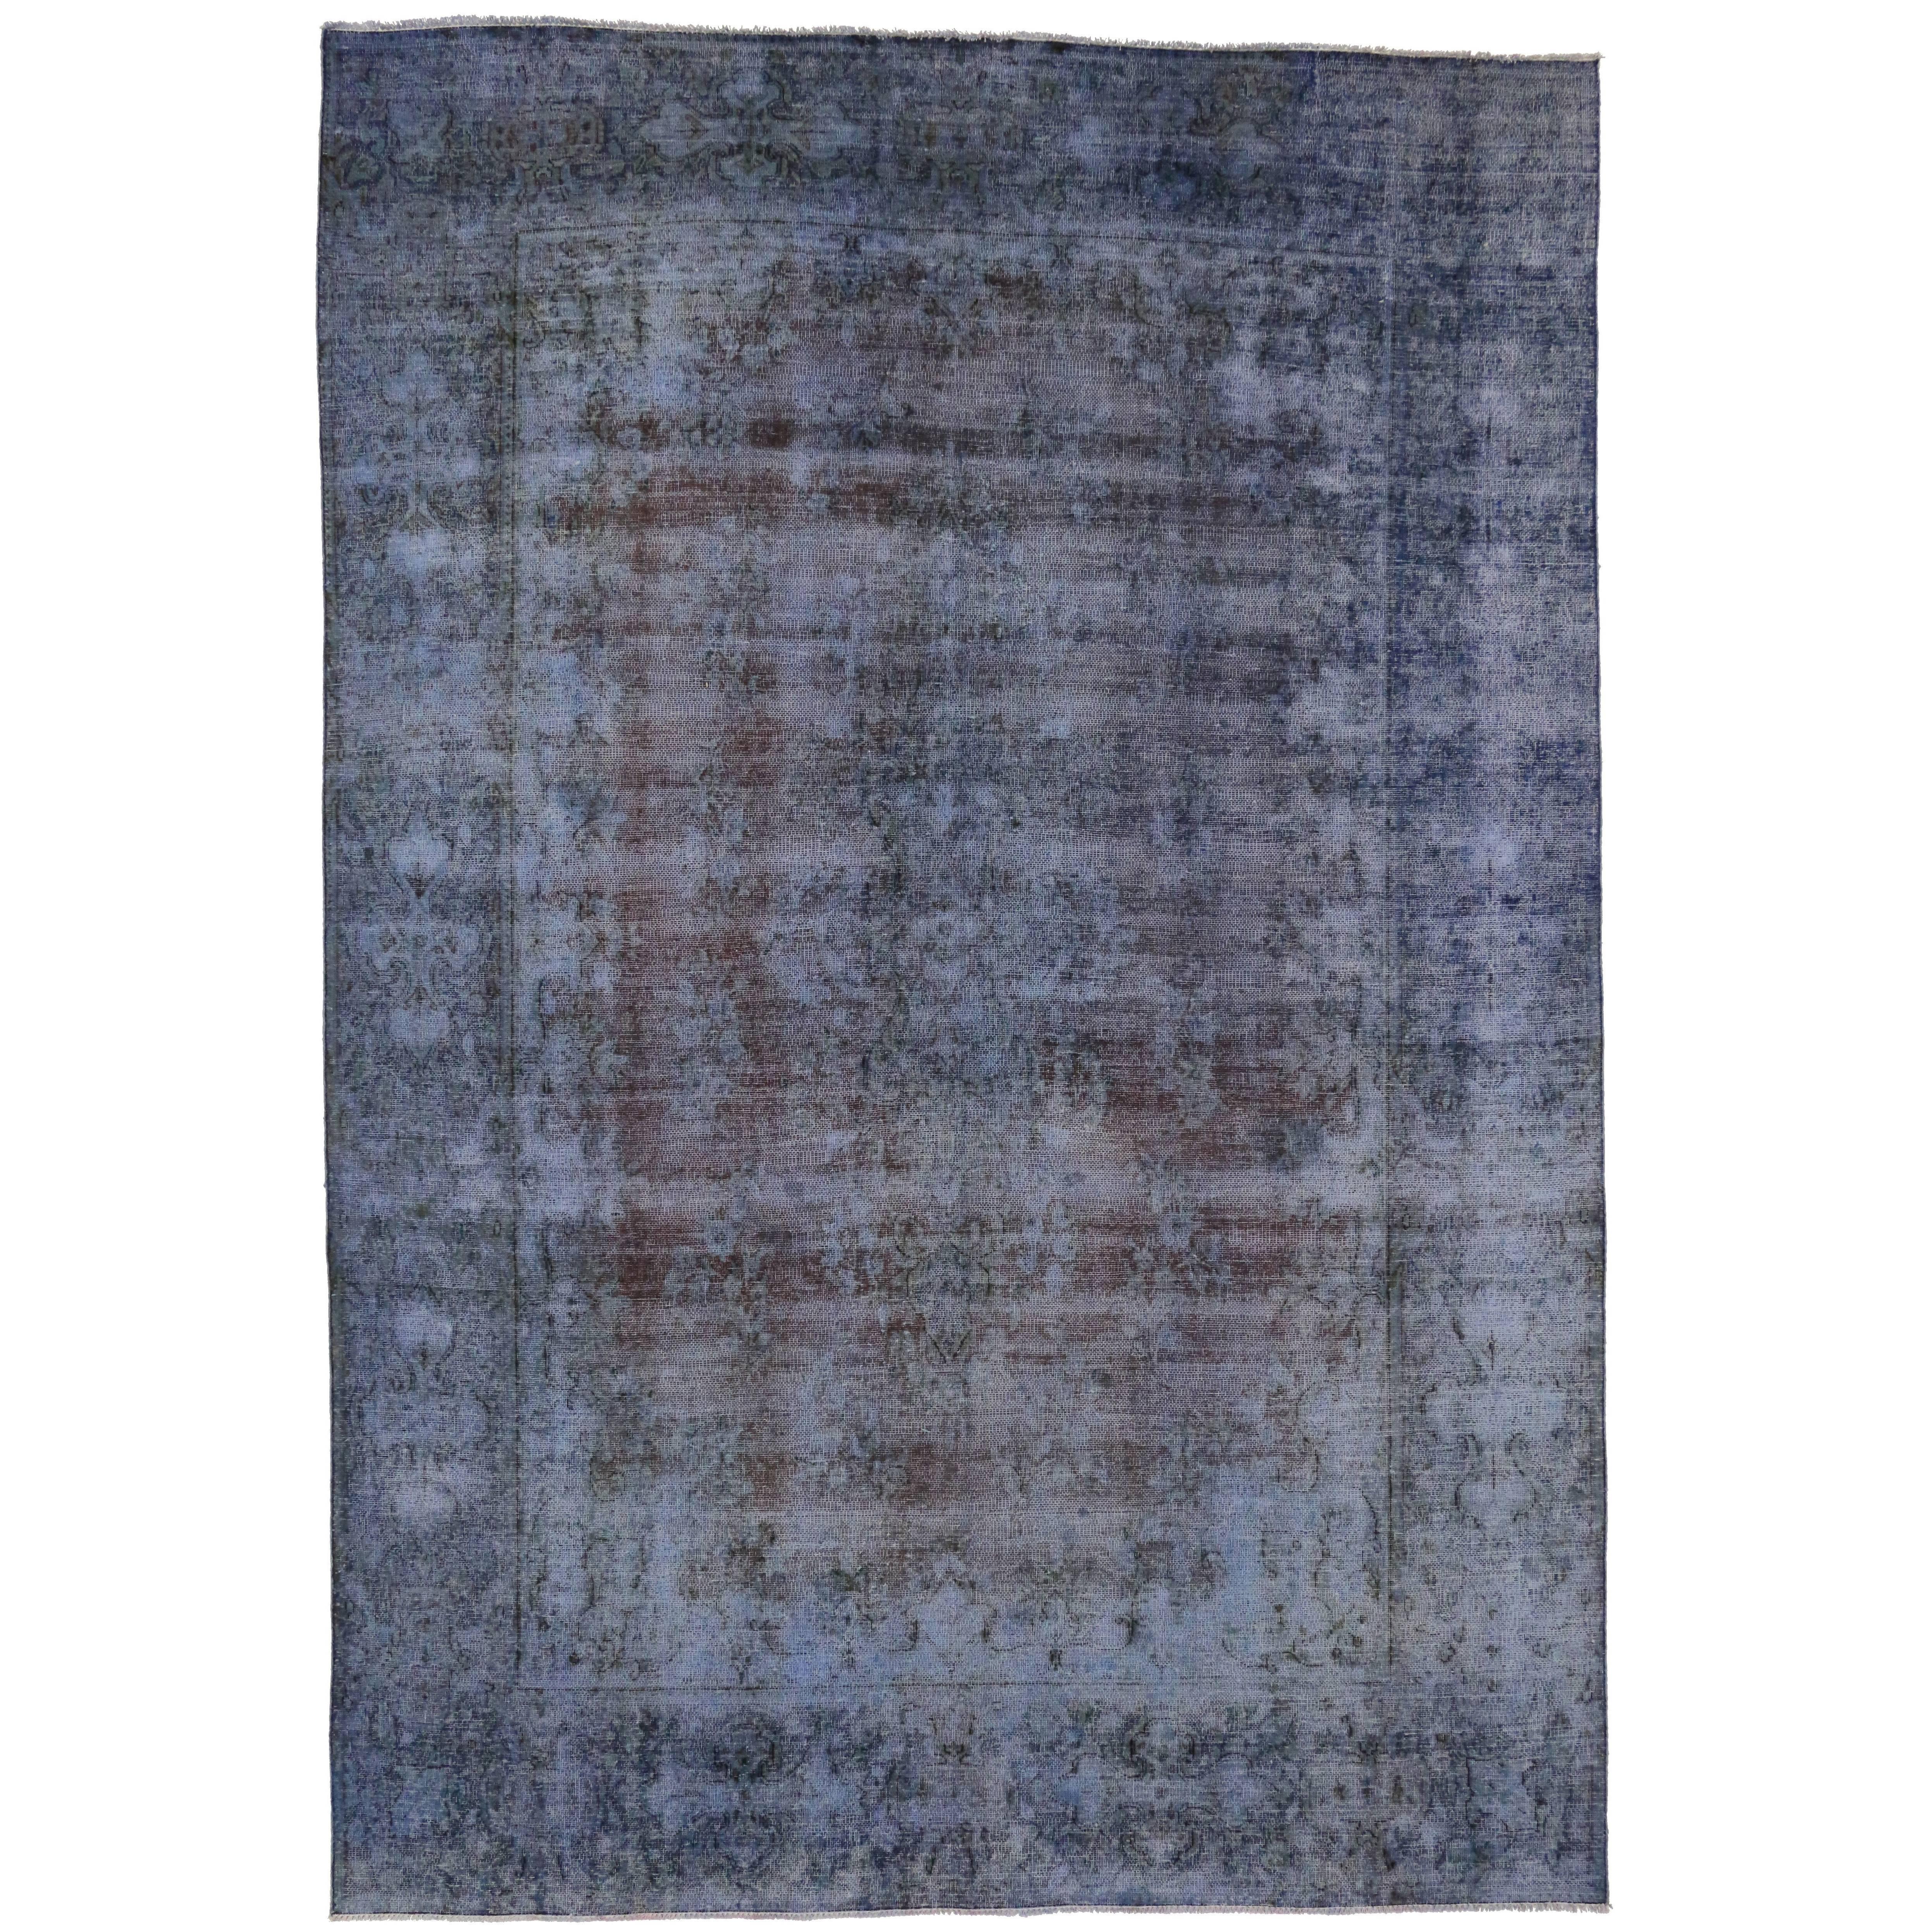 Distressed Vintage Persian Rug Overdyed with Modern Industrial Style